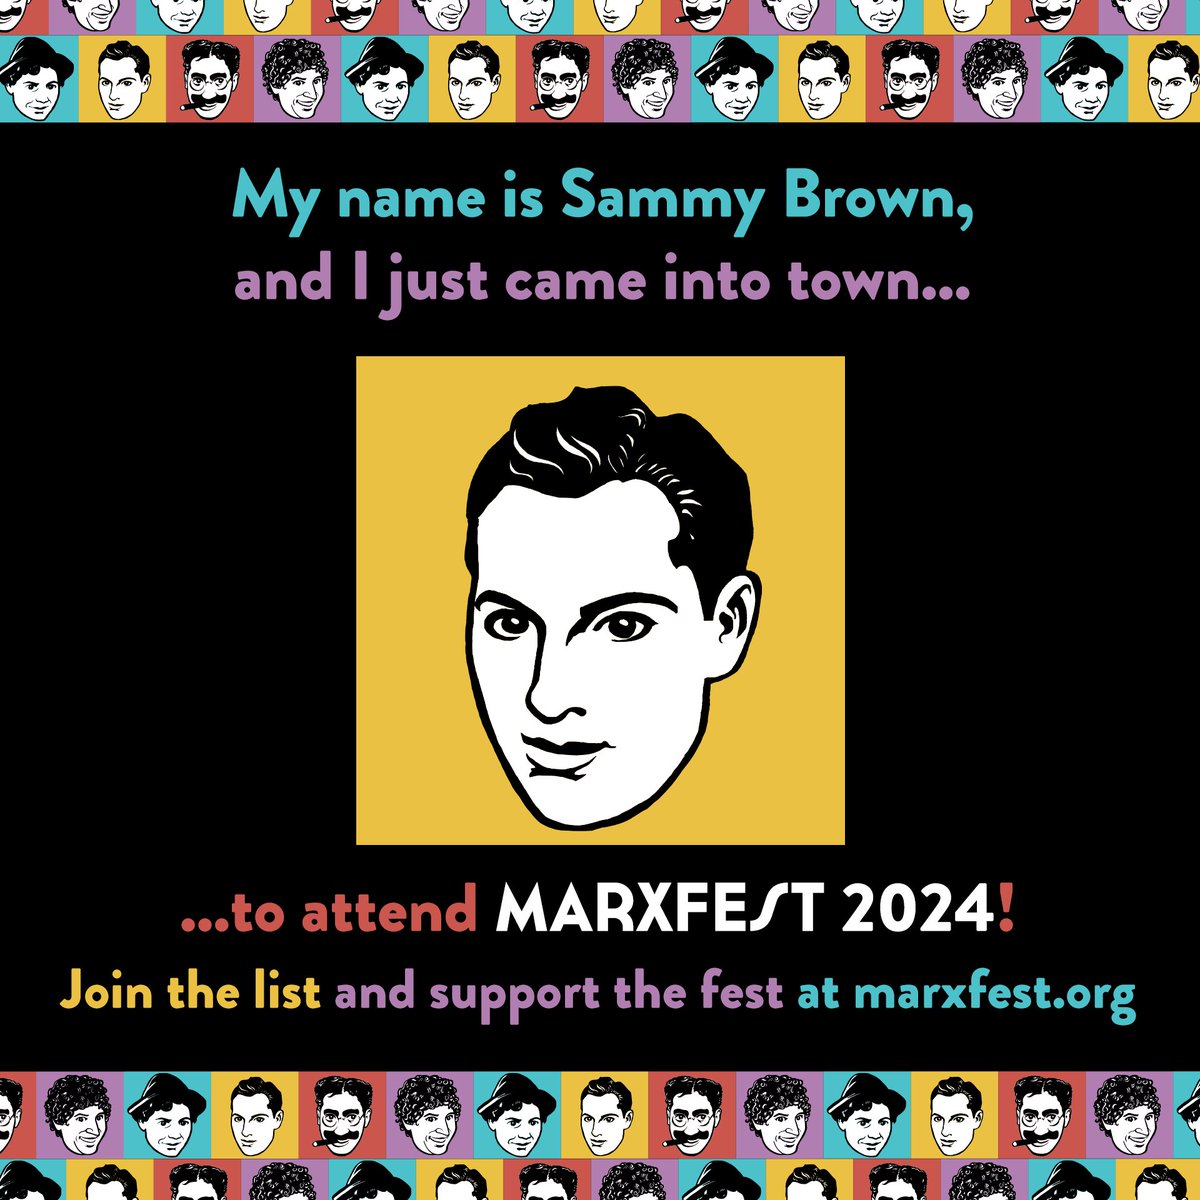 Thanks for your support! We launched Marxfest 2024 crowdfunding one week ago, and we're already over halfway to our campaign goal of raising $15K toward the fest budget. Please consider making a tax-deductible donation, or sharing the campaign with others! fundraising.fracturedatlas.org/marxfest-2024/…